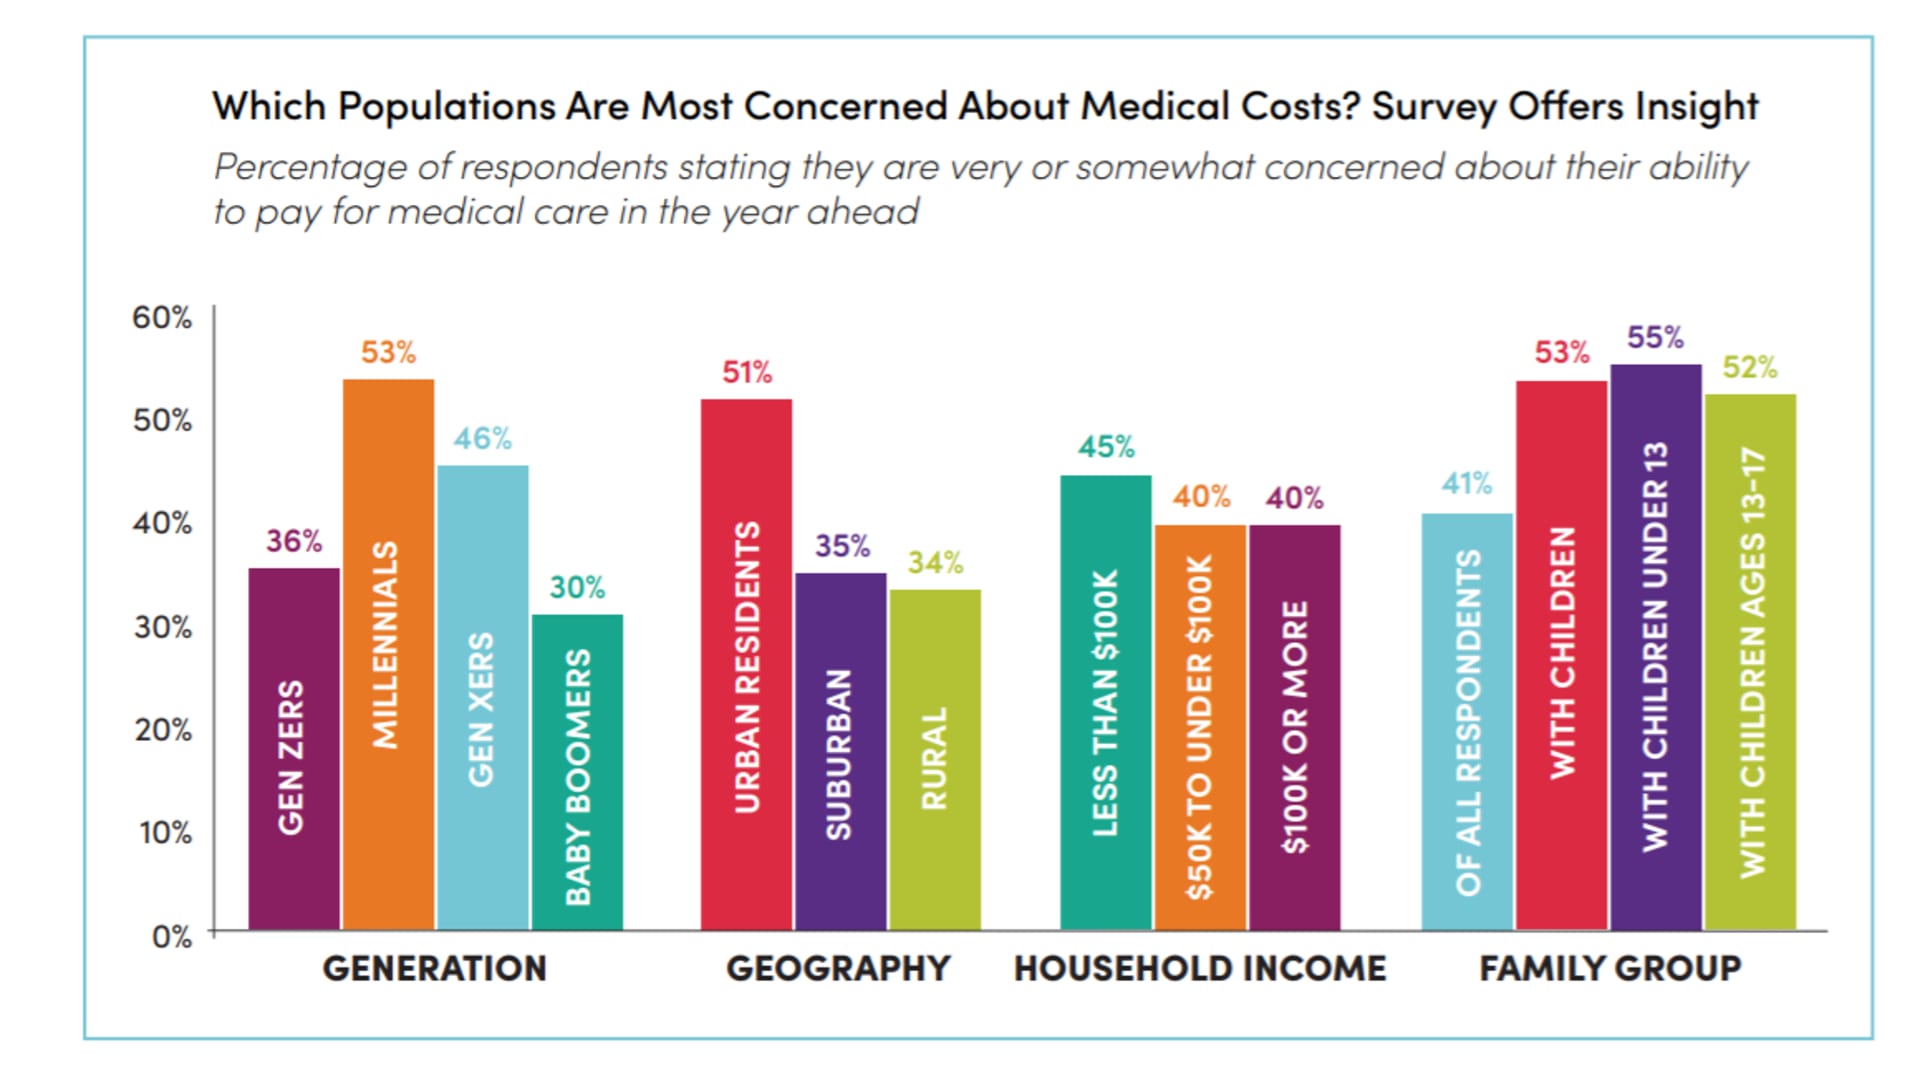 AcessOne surveyed Americans on their concern around the ability to pay their medical bills. 